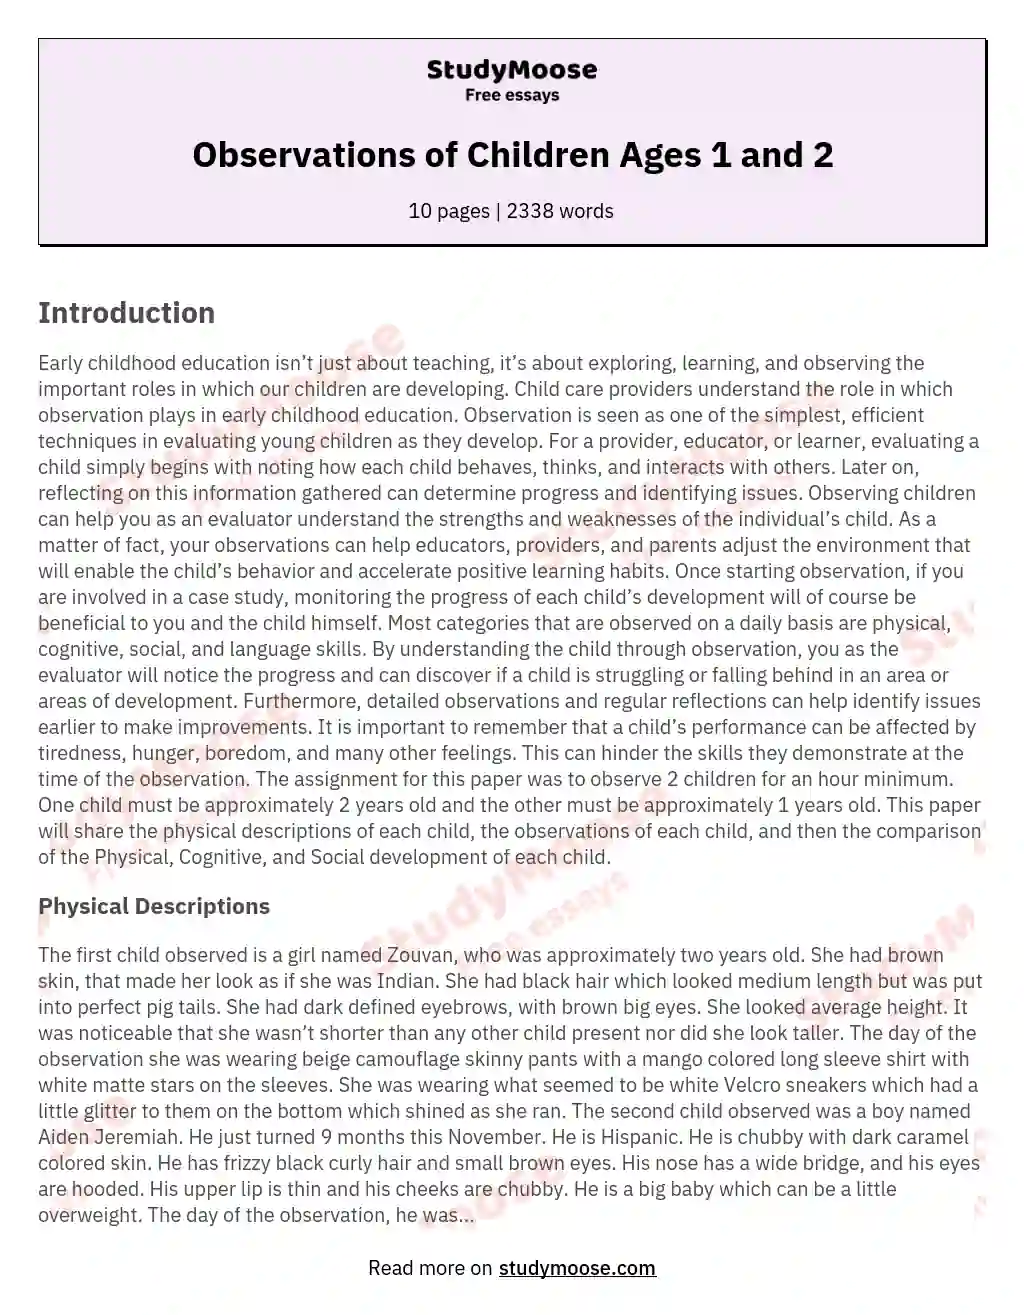 Observations of Children Ages 1 and 2 essay